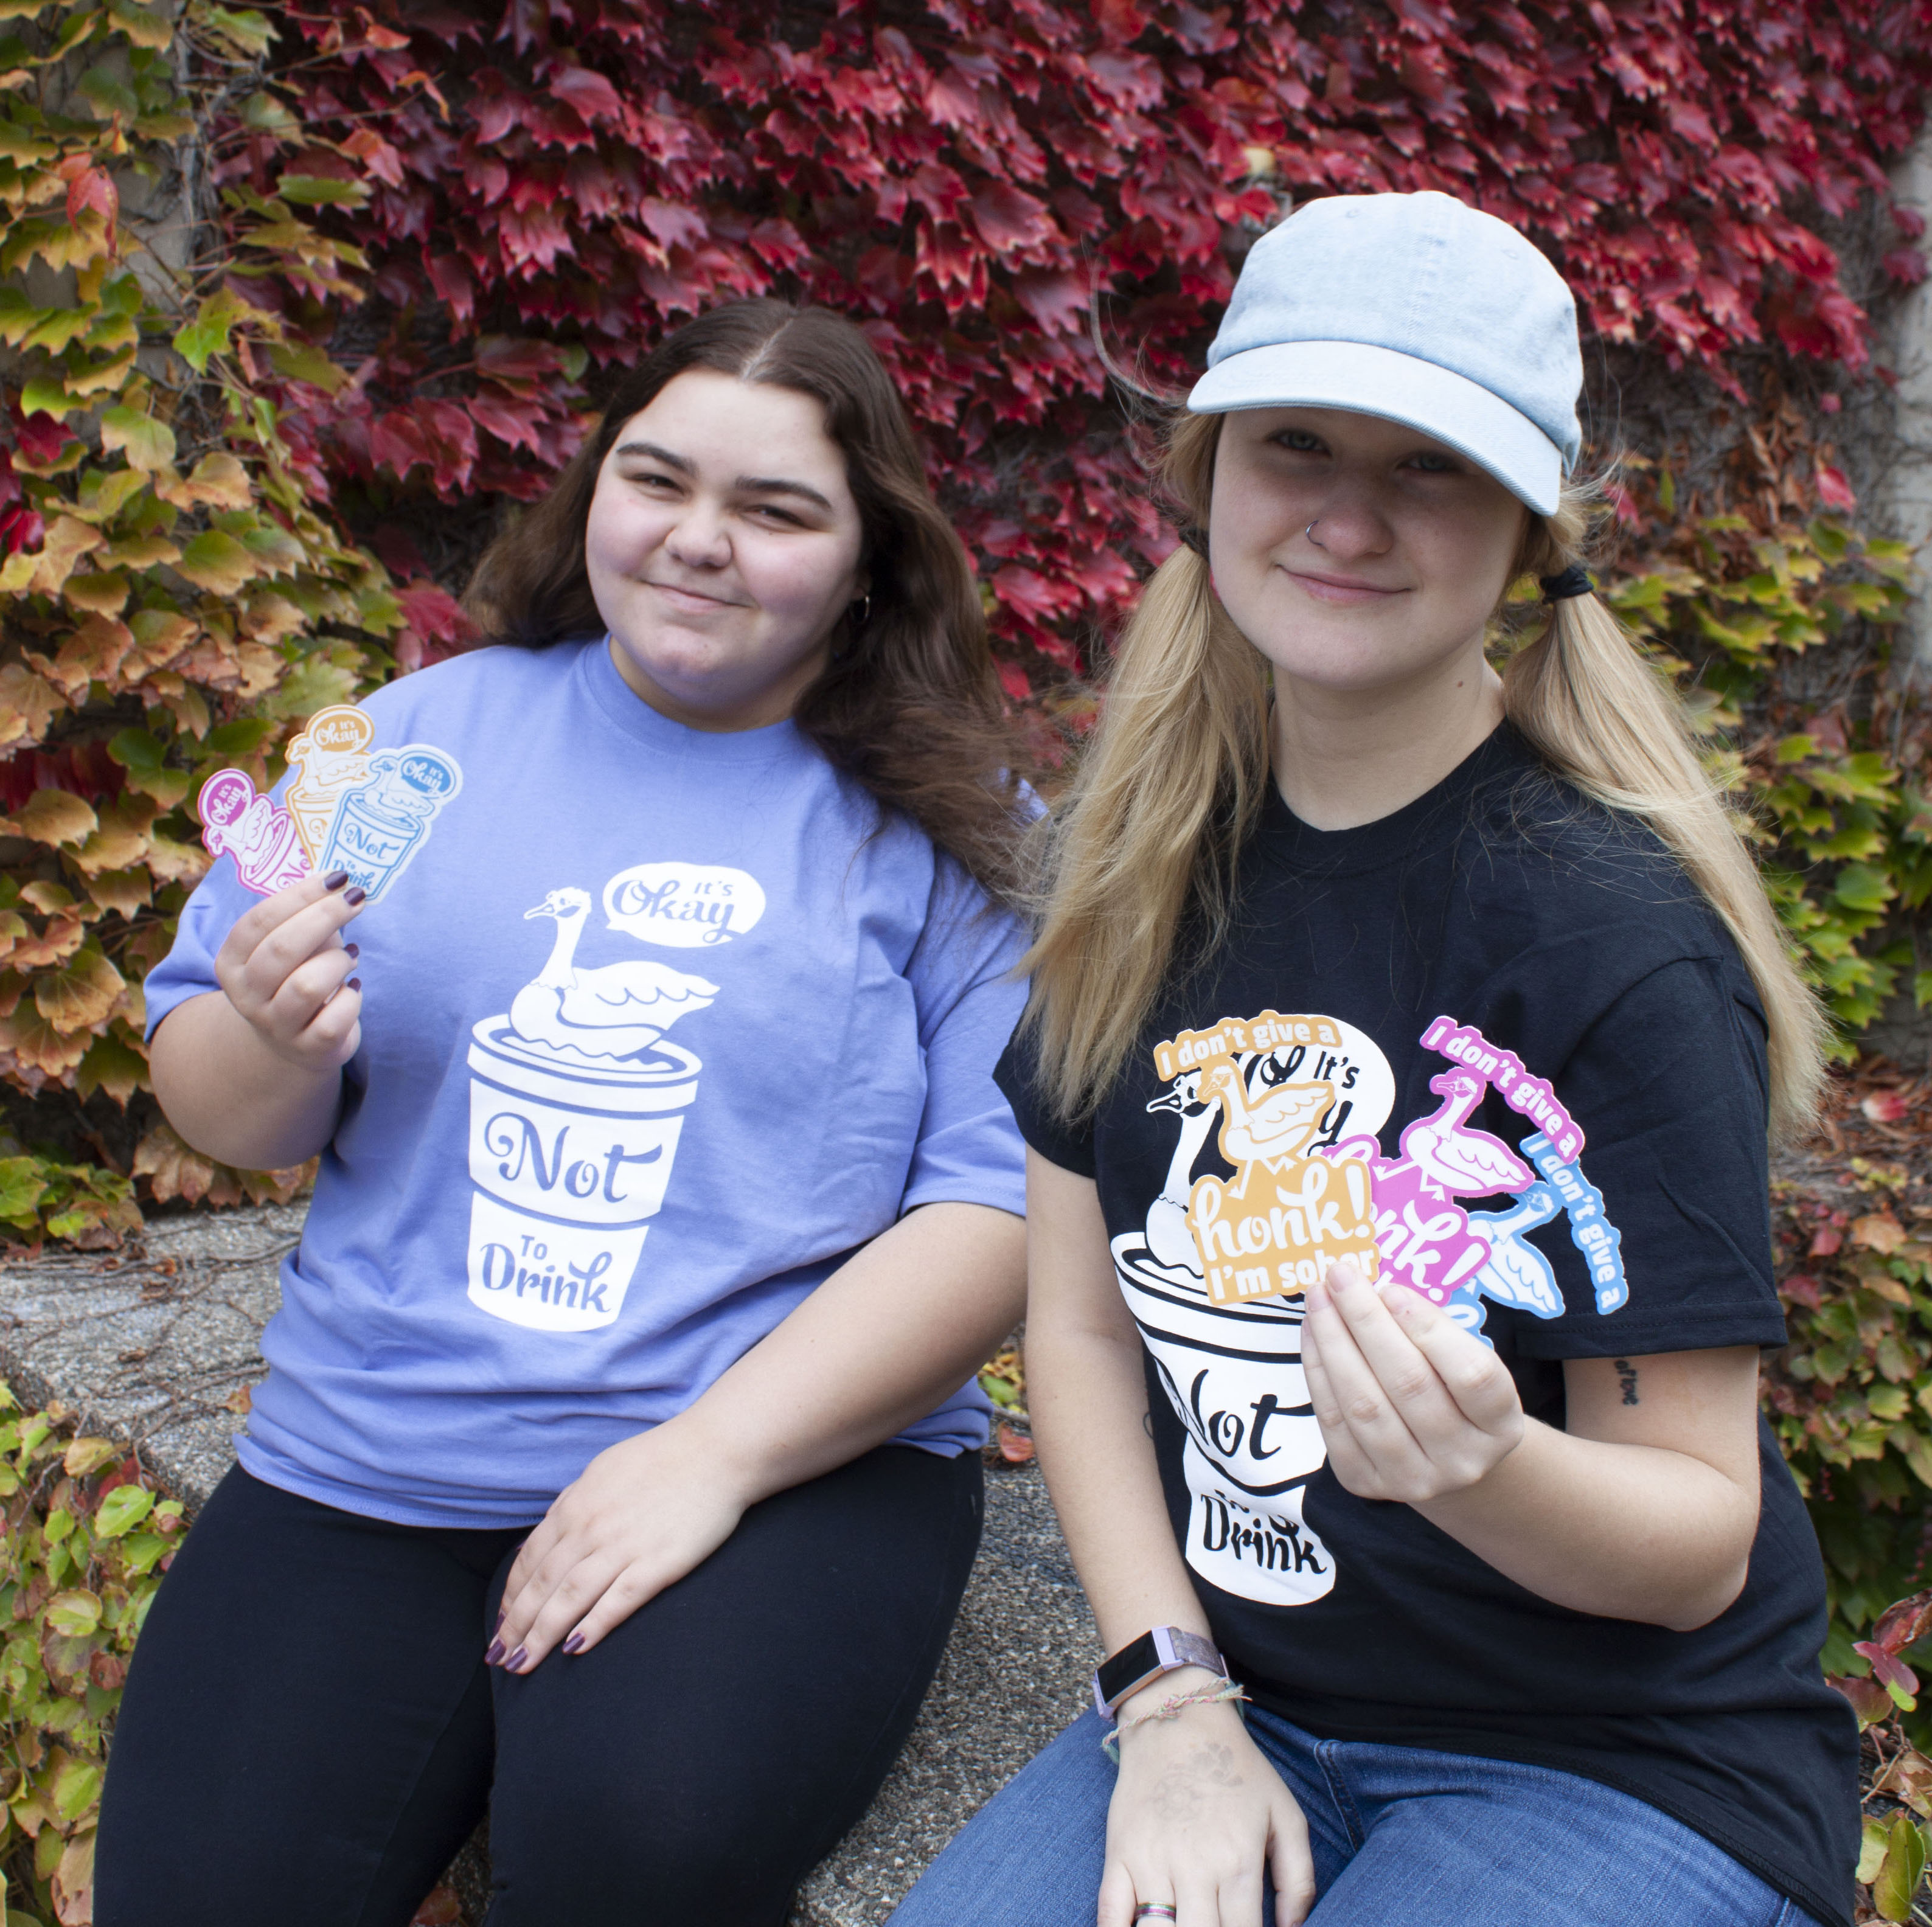 Students showing "It's Okay Not To Drink" merch